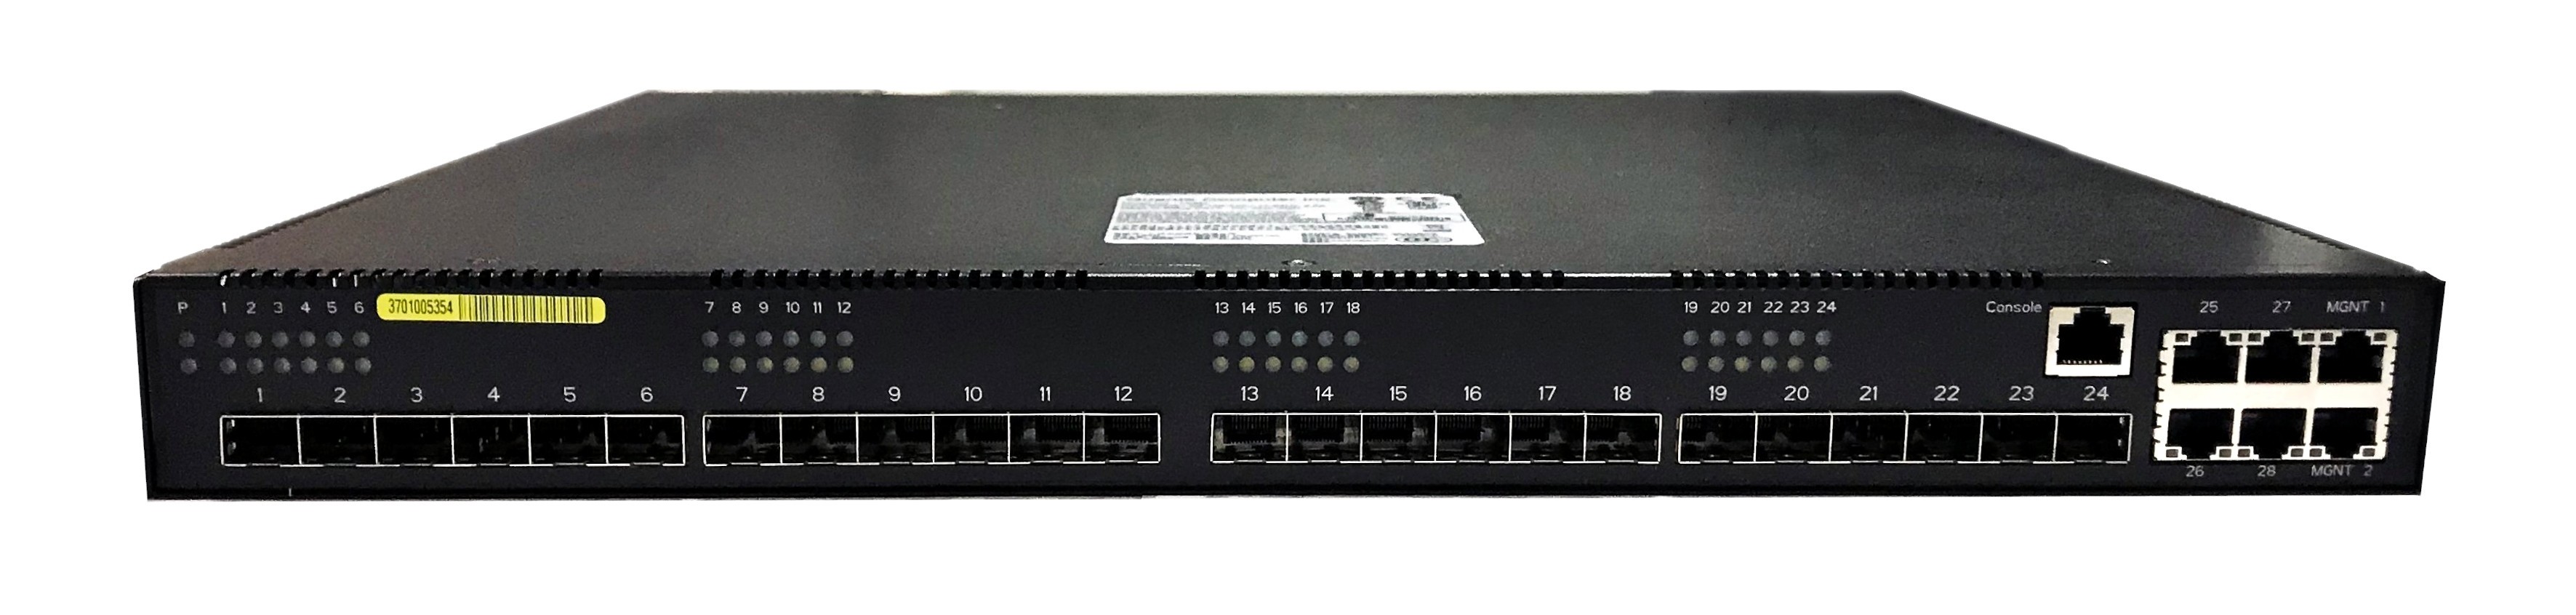 QUANTA LB6M Network Switch 10GB 24-Ports SFP+ Dual Power Supply With R